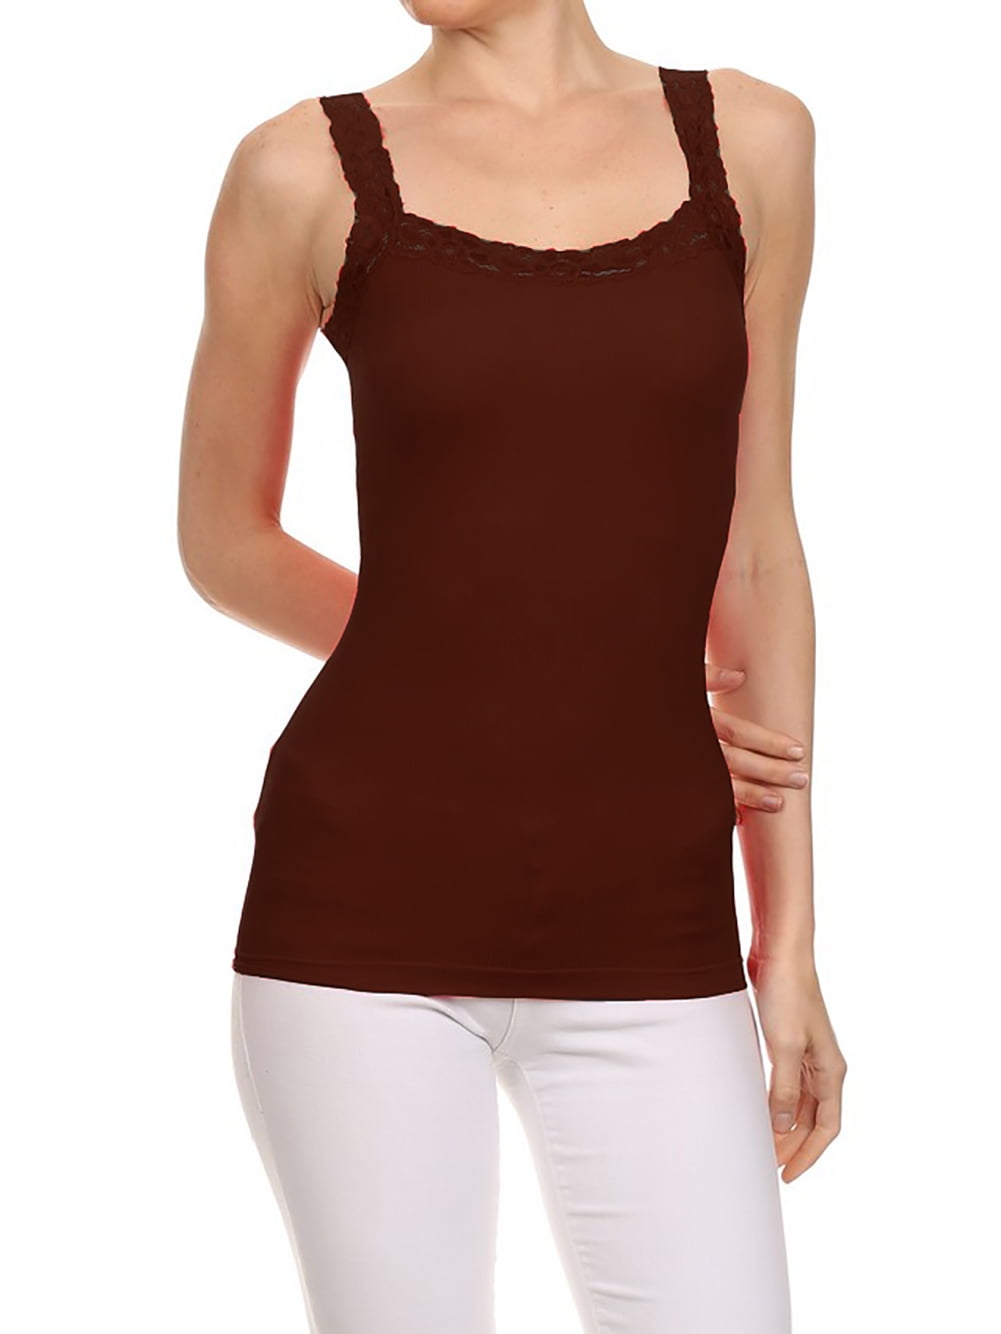 EHQJNJ Camisole Tops for Women Built in Bra Brown Women Wooden Ear Edge  Hanging Neck Sling Two Wear Chest Wrap Top Vest Womens Camisole Tank Tops